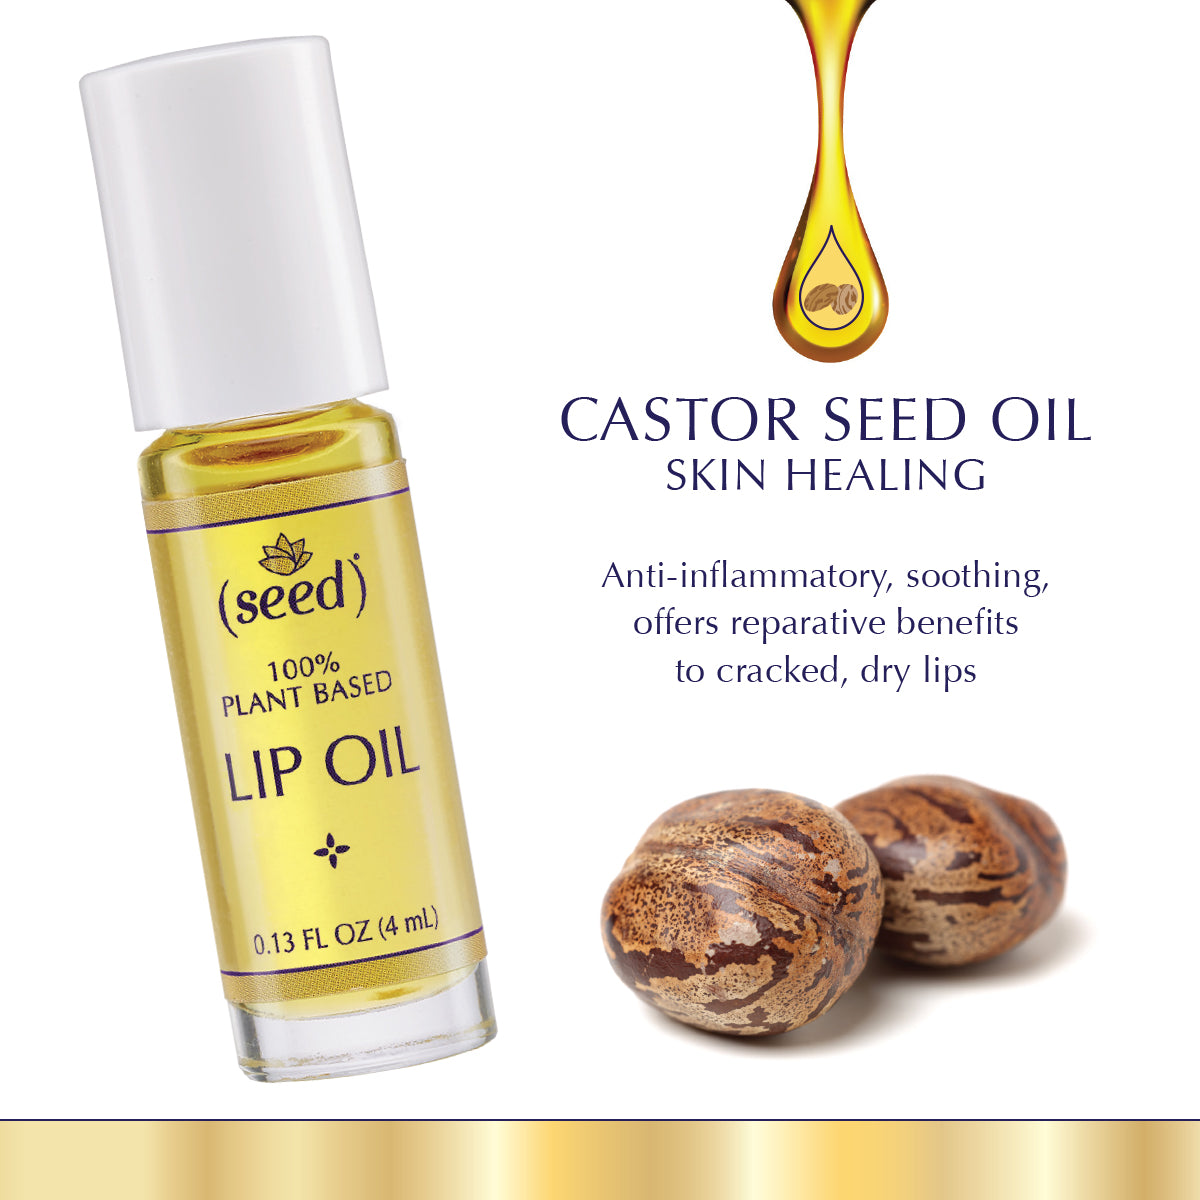 Seed Lip Oil features skin healing castor seed oil